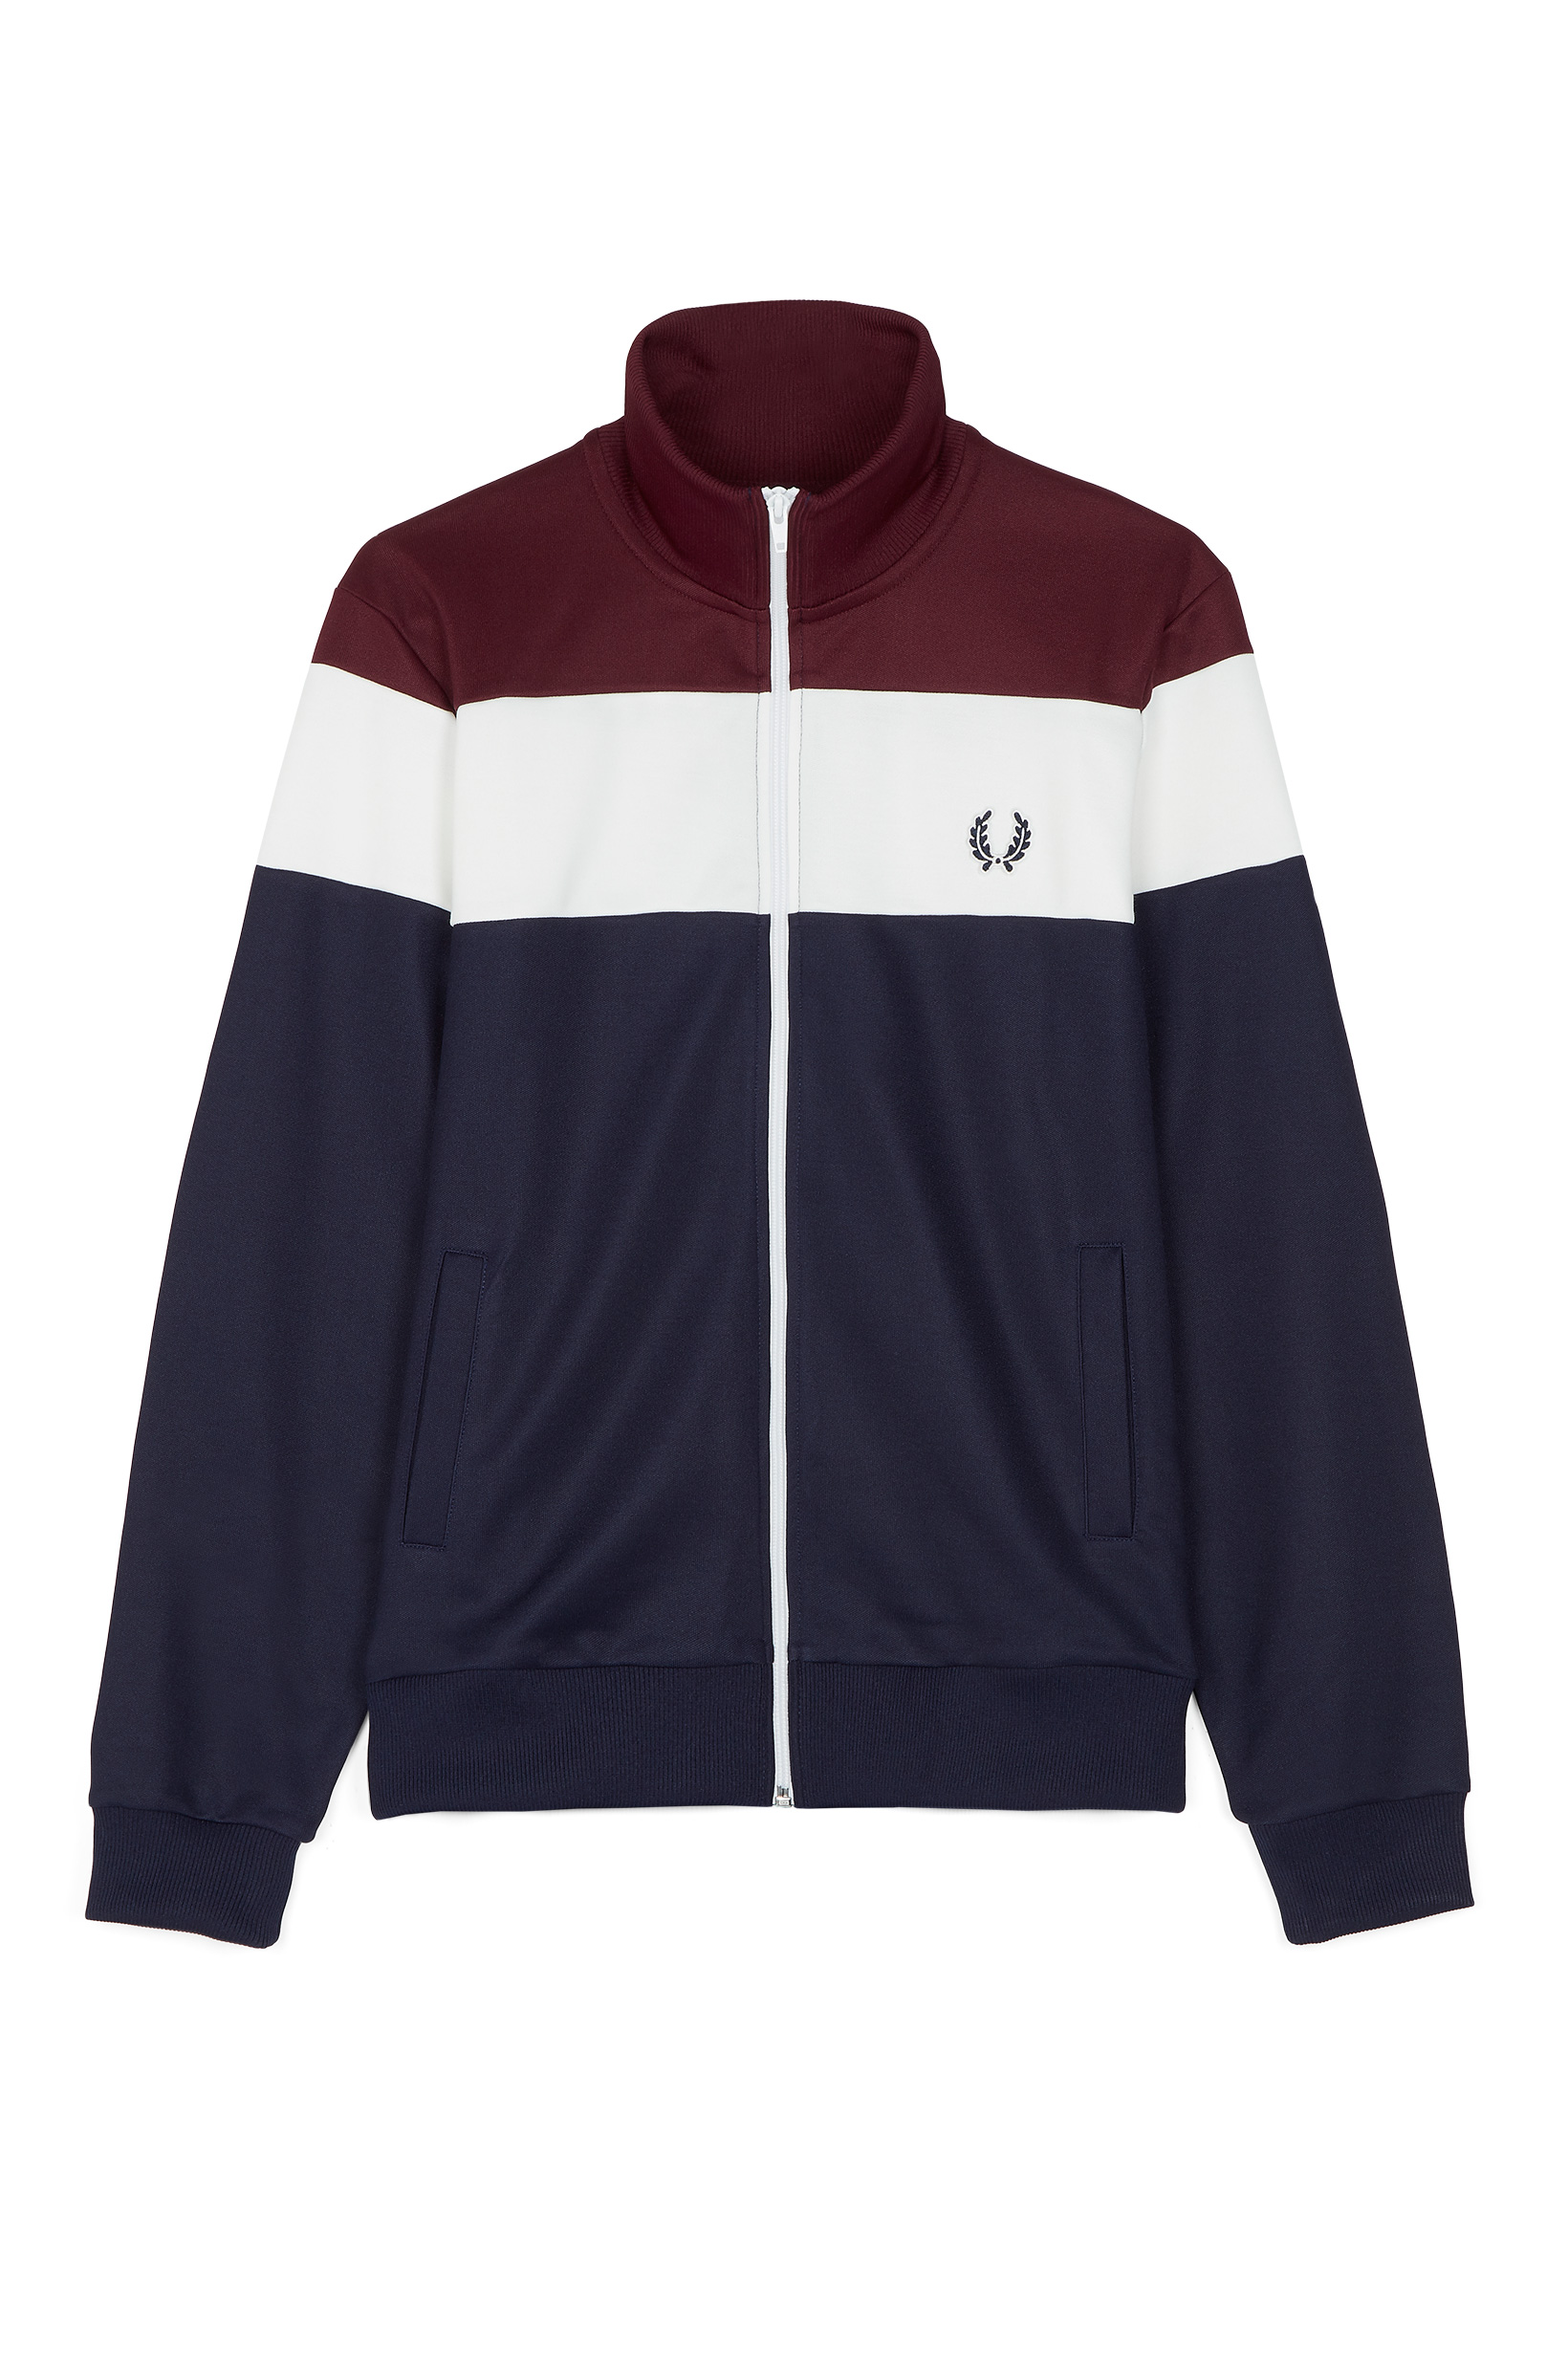 fredperry2